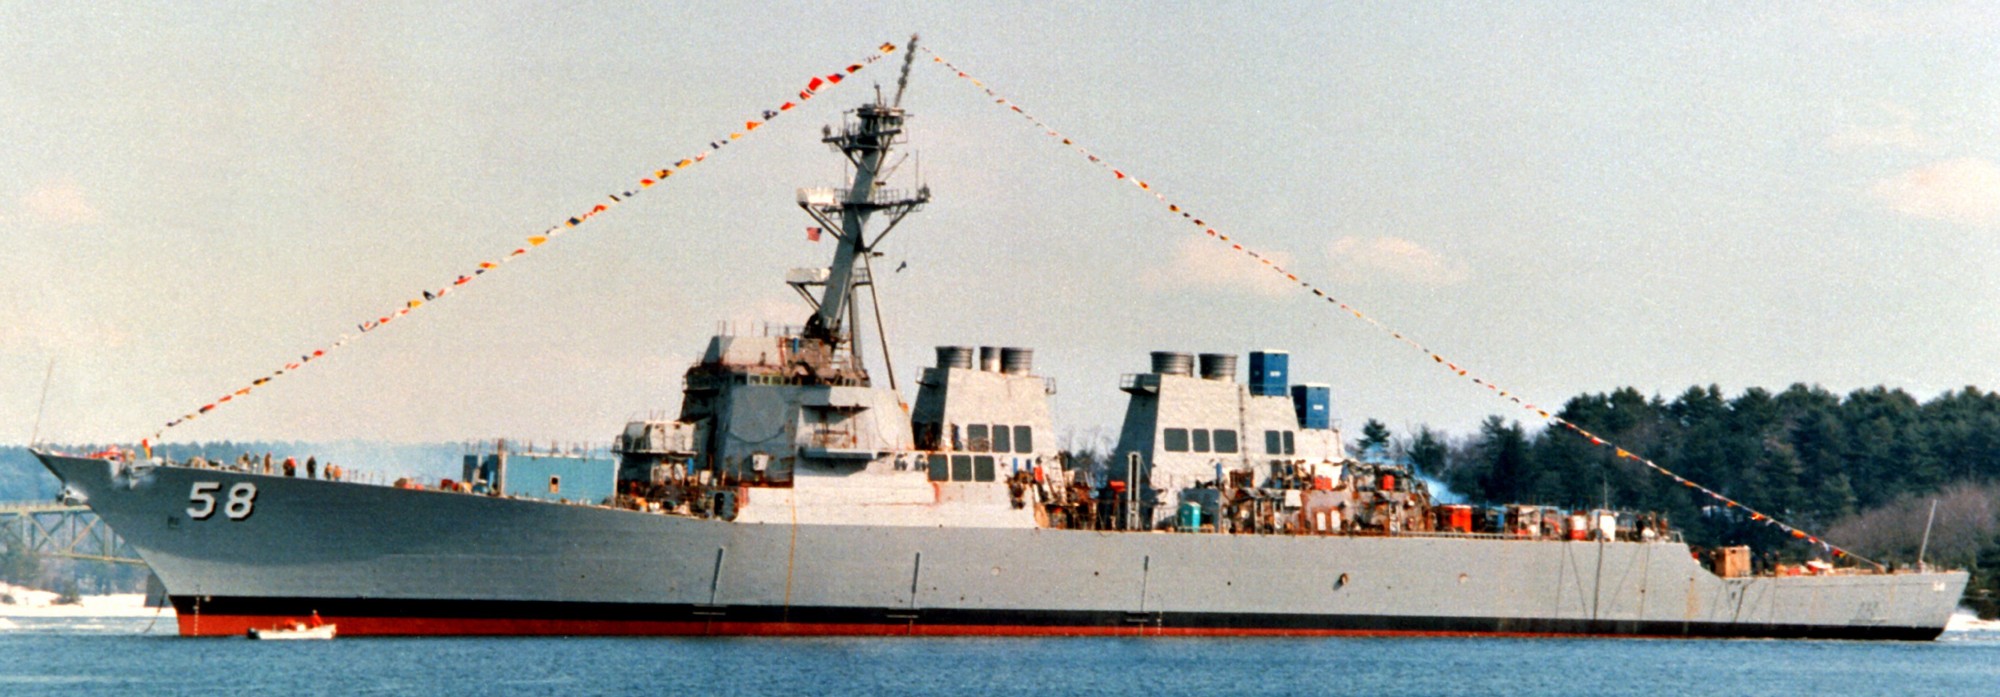 ddg-58 uss laboon guided missile destroyer us navy 81